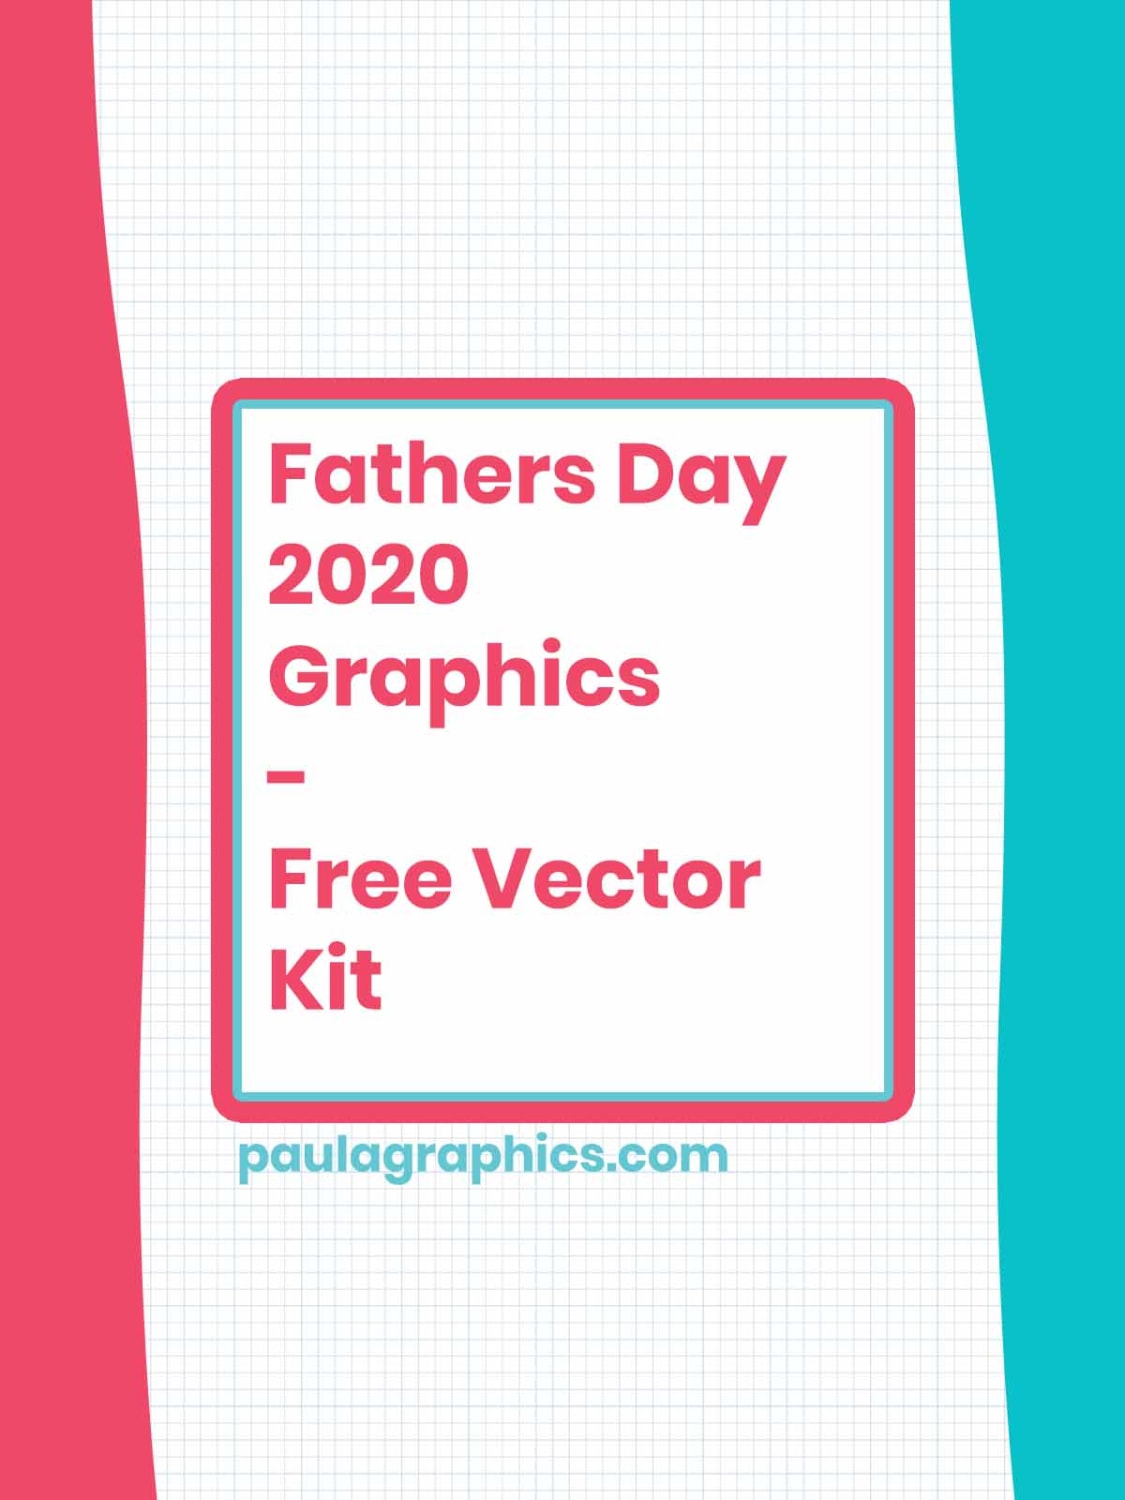 Fathers Day 2020 Graphics - Free Vector Kit